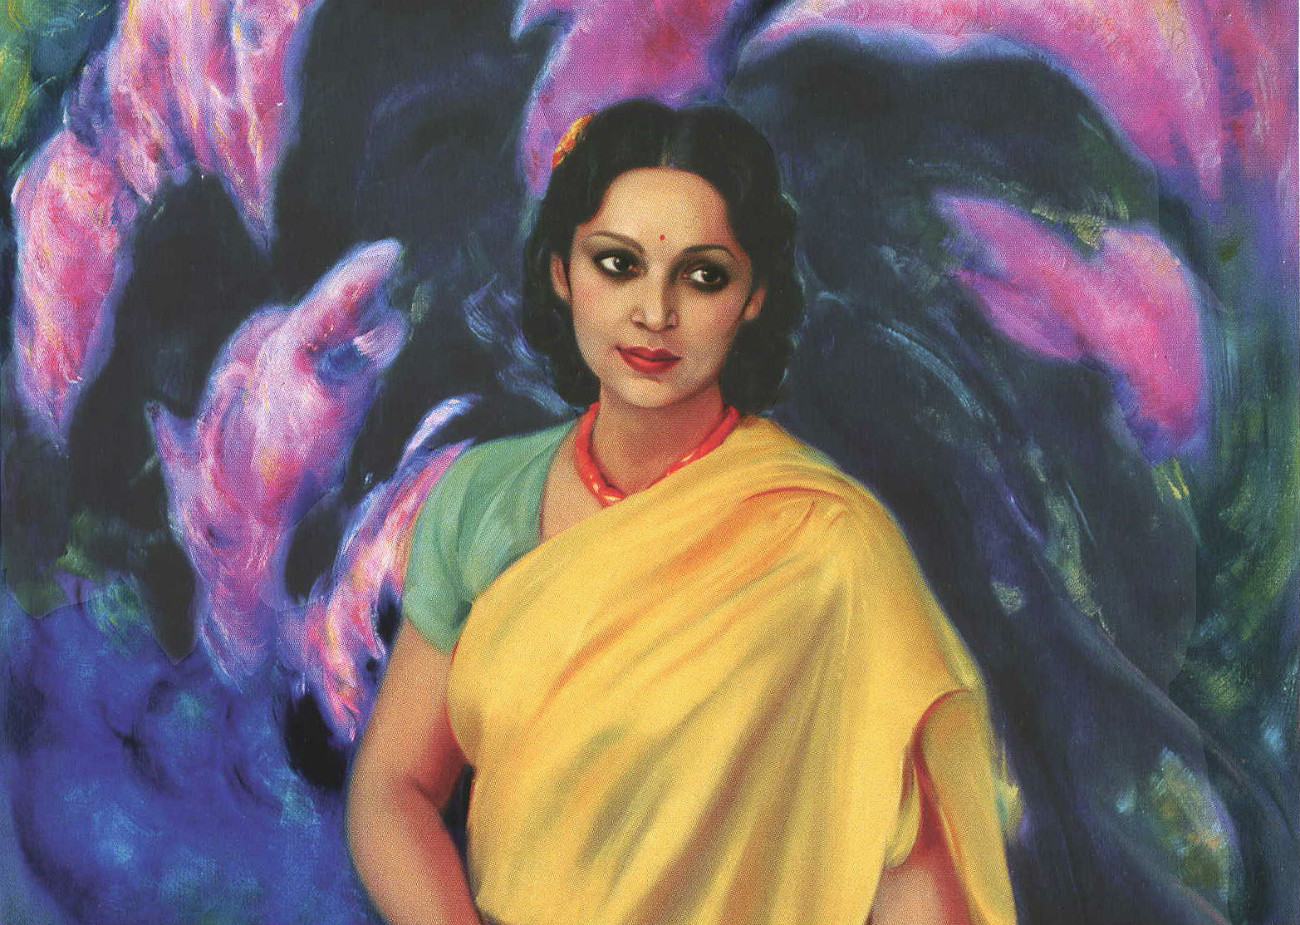 When the ‘first lady of Indian cinema’ married a legendary Russian artist